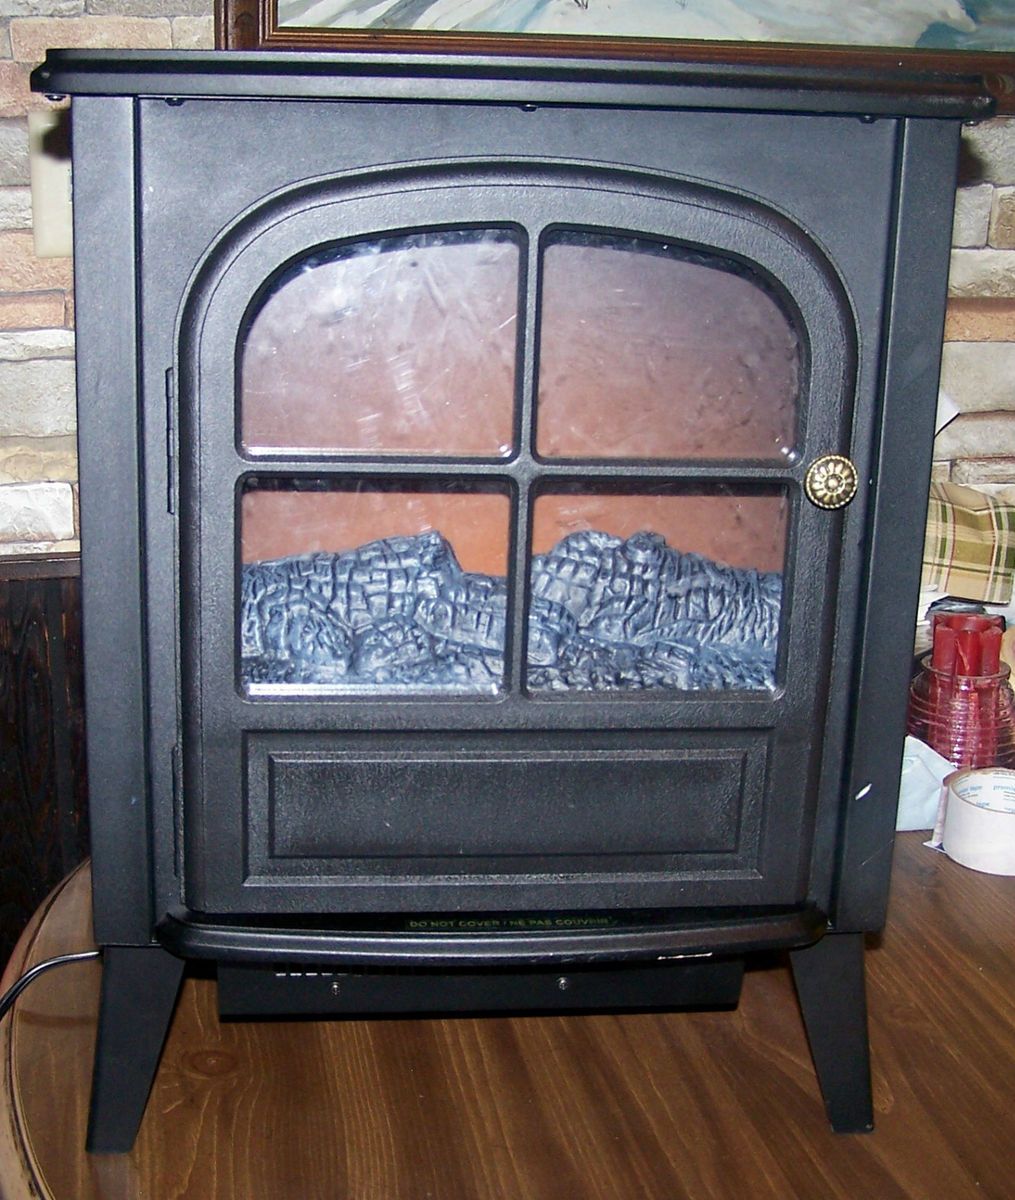 Modern electric firebox Stove Fireplace Heater with nice fake gas logs